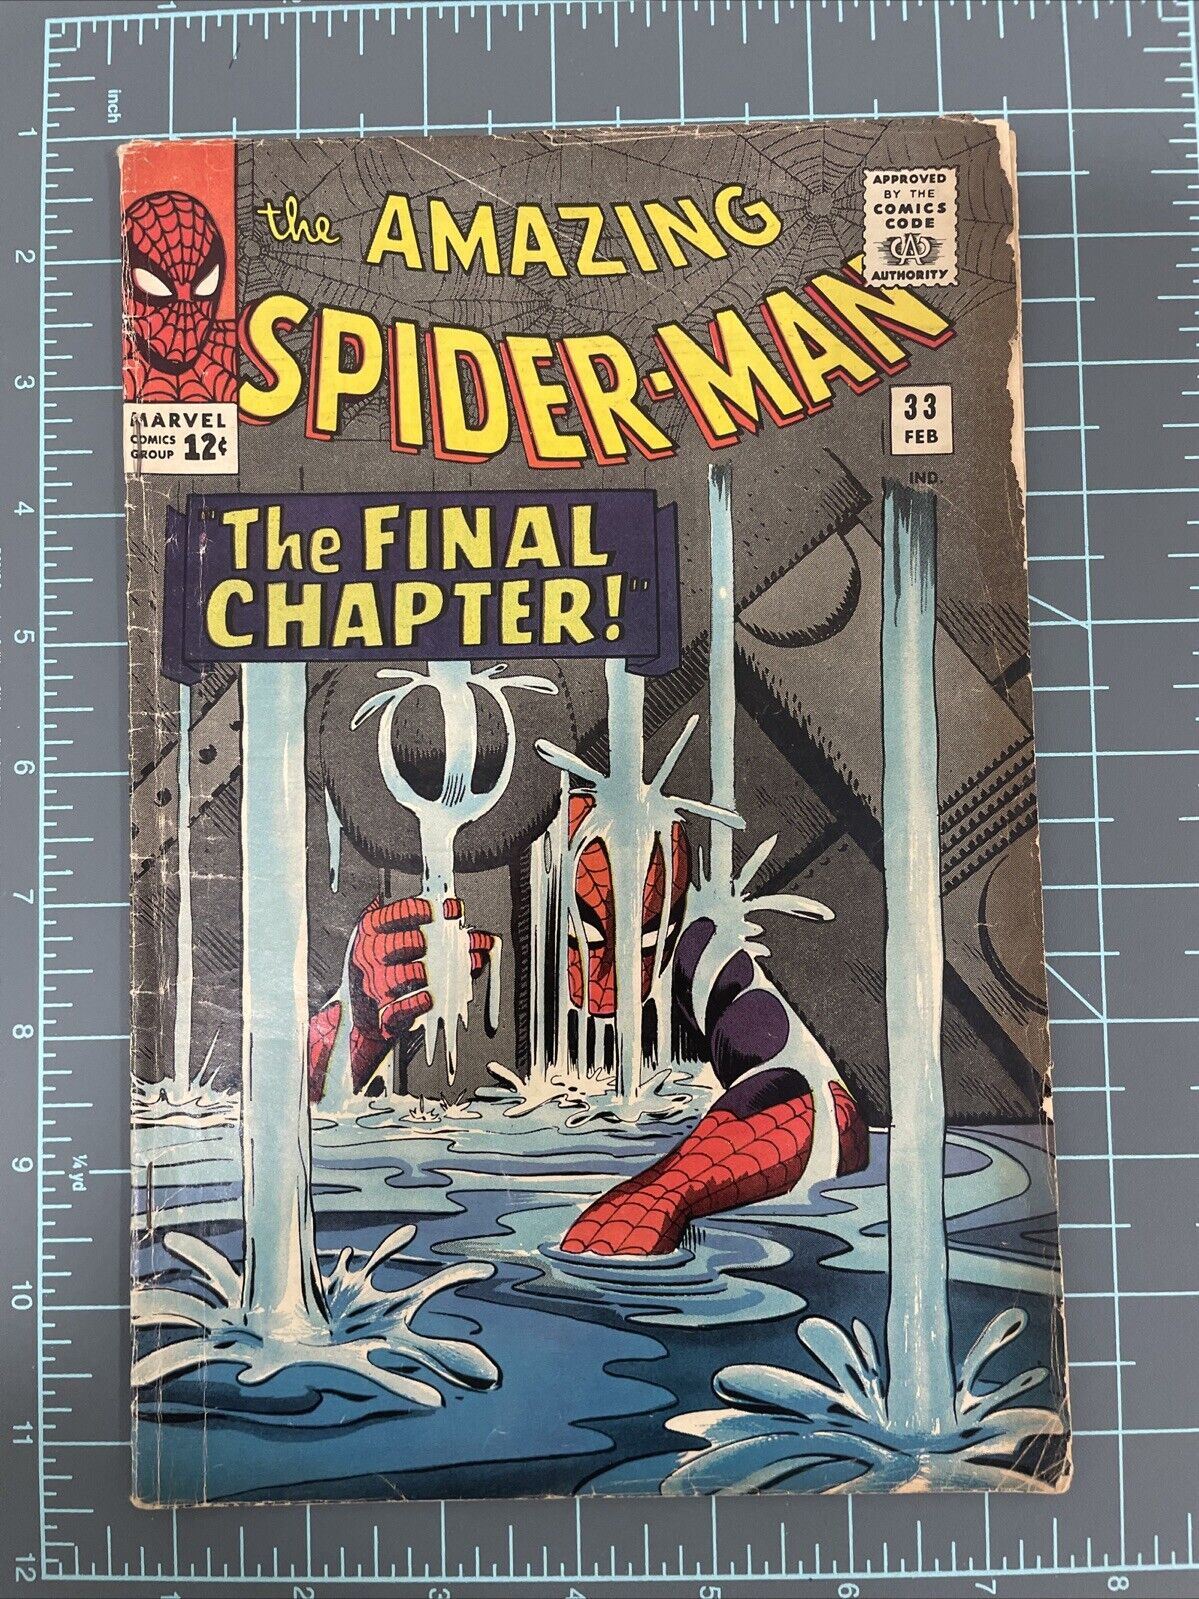 The Amazing Spider-Man #33 - Key Issue: First Debut of a New Power (1966) Iconic